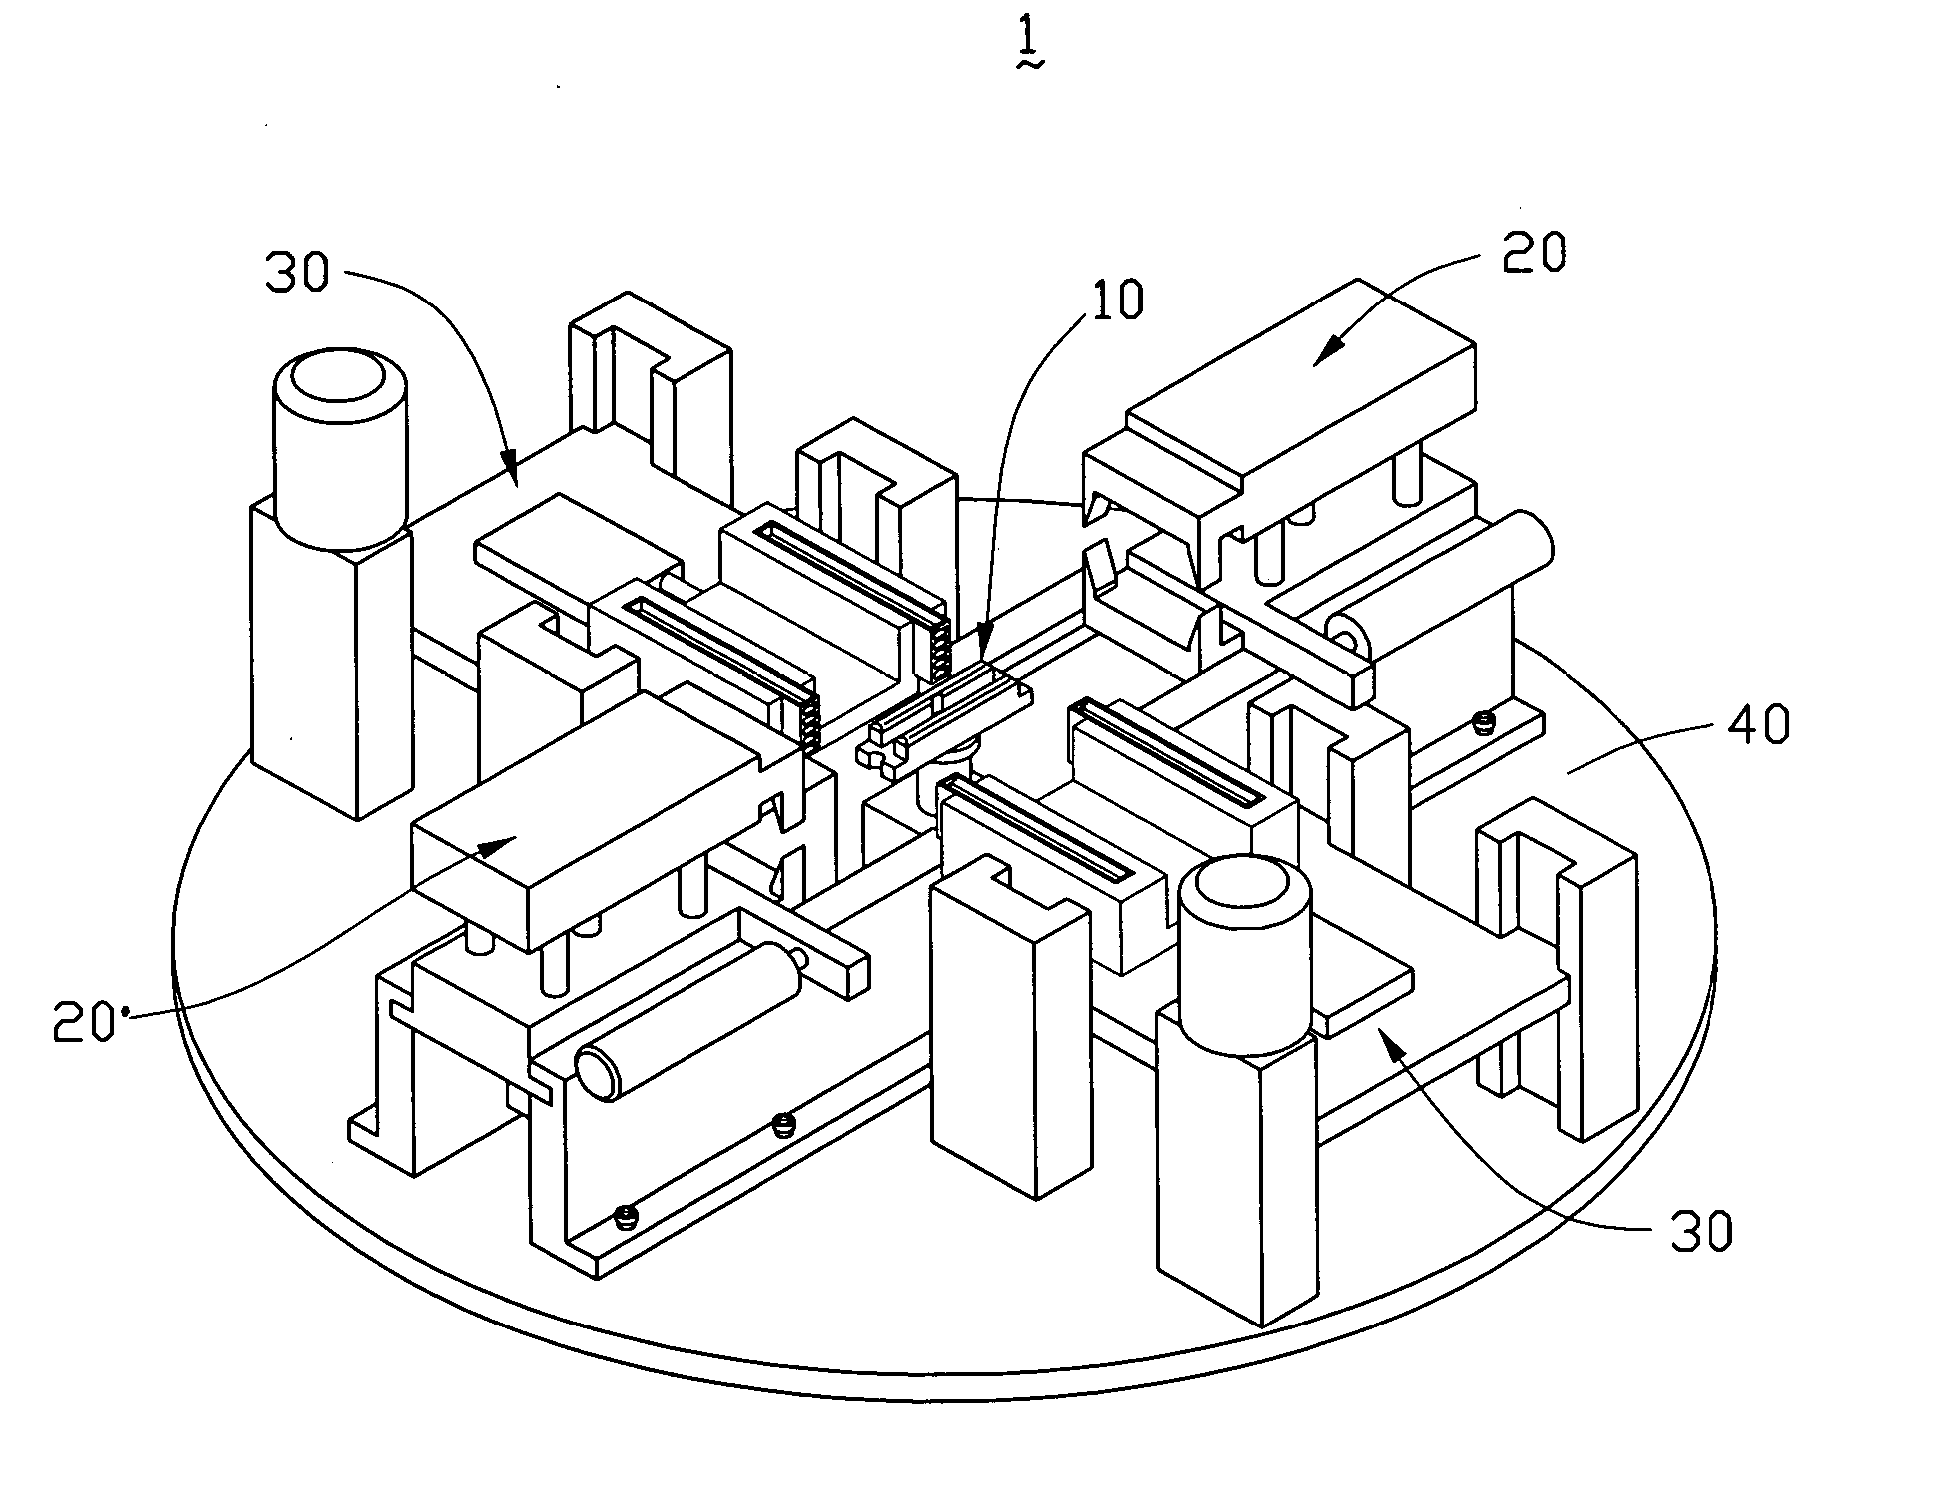 Automatic cutting machine having receiving device for lens